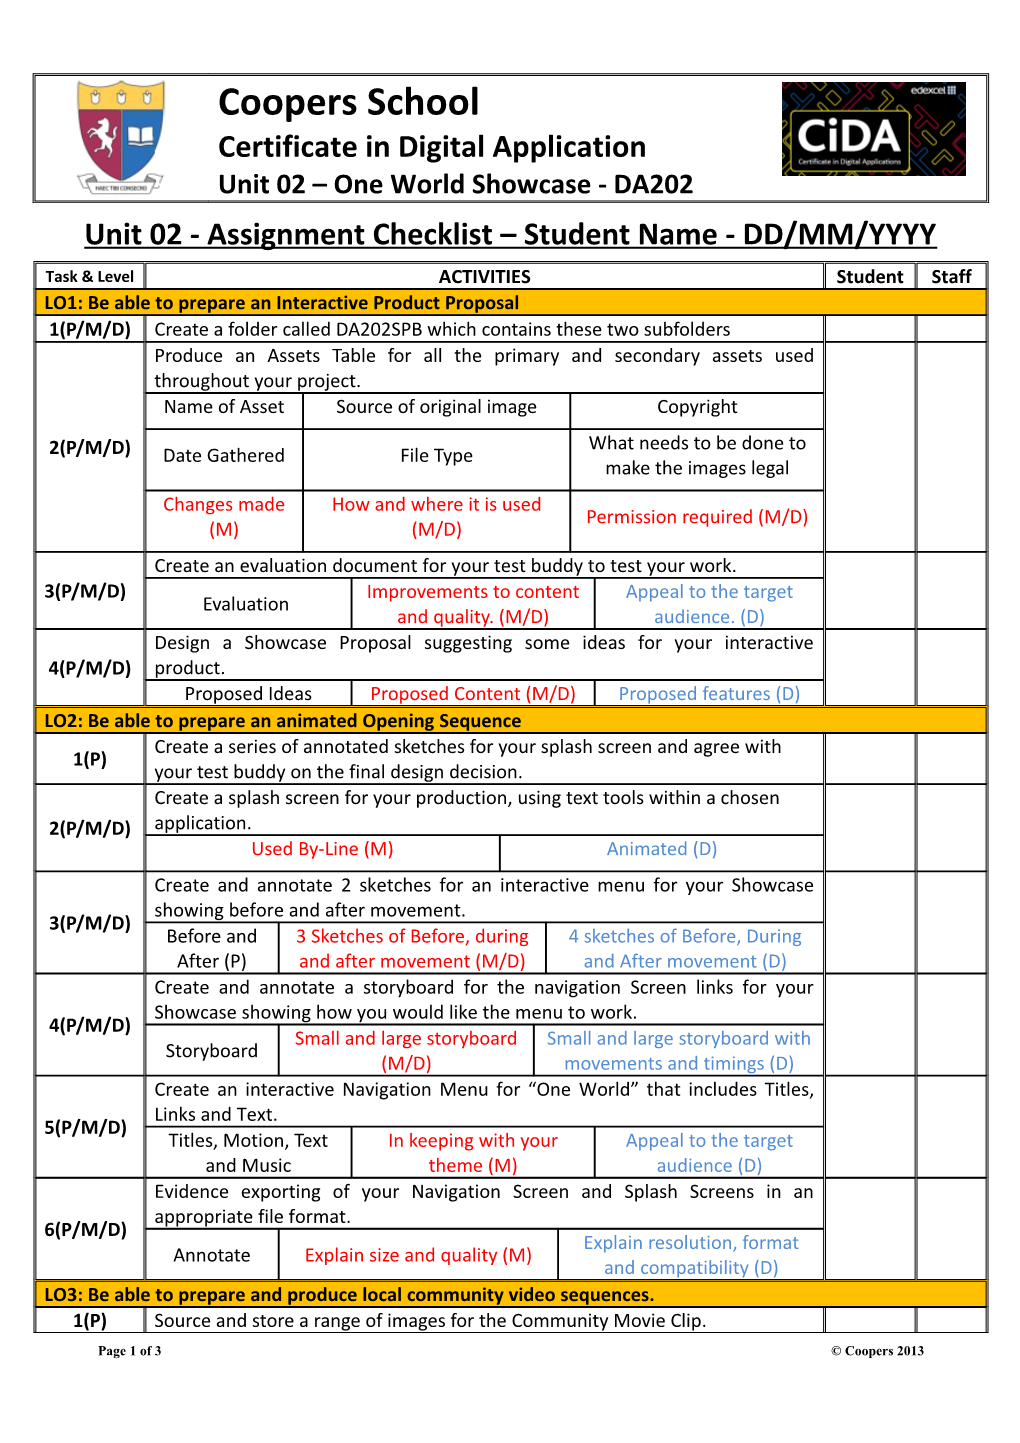 Unit 02 - Assignment Checklist Student Name - DD/MM/YYYY